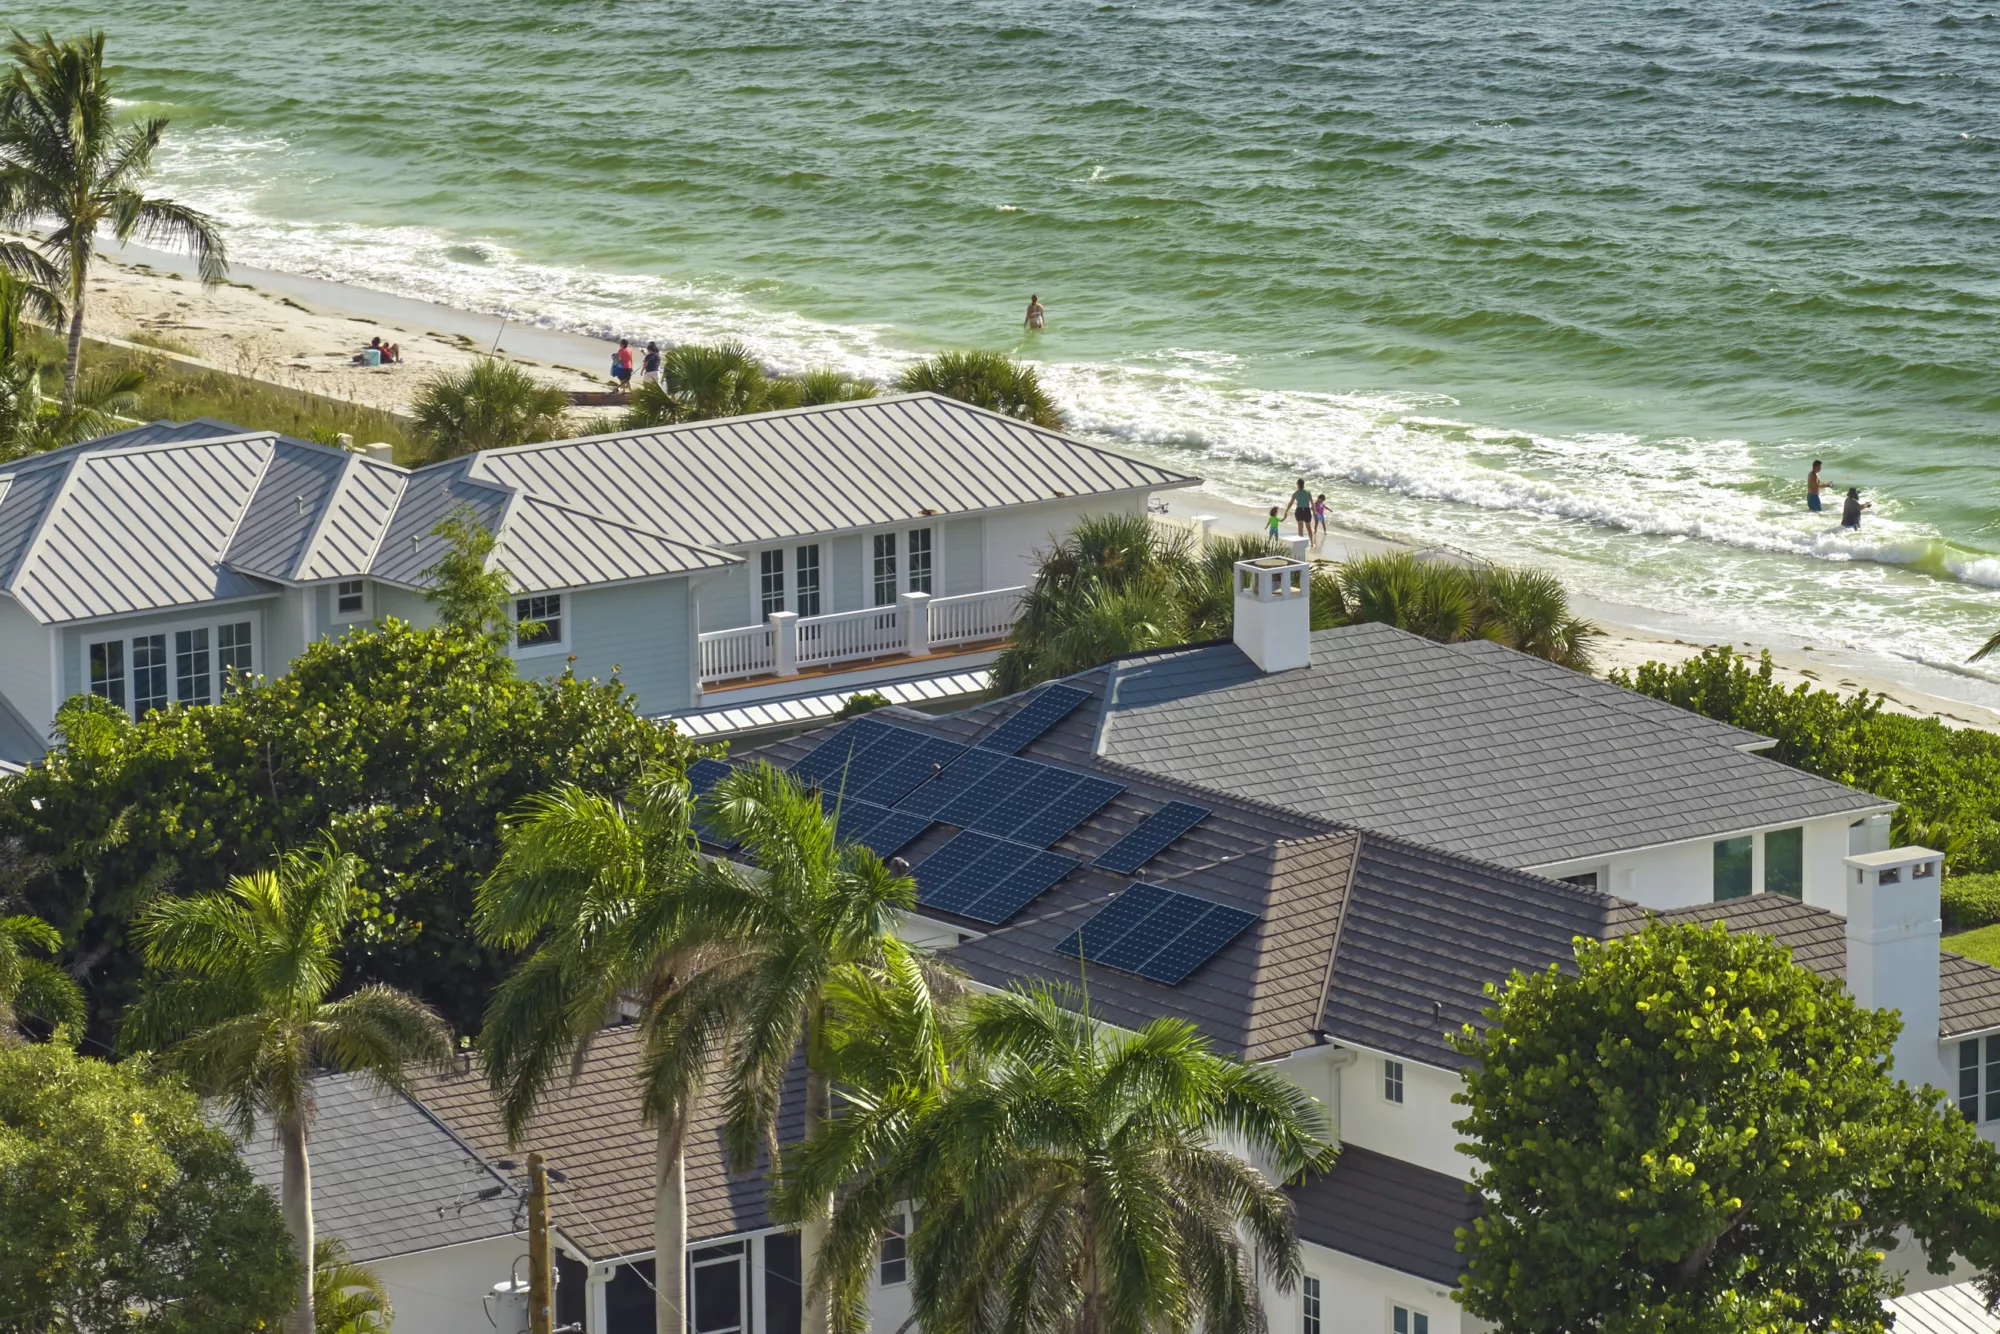 Florida residential home with solar panels